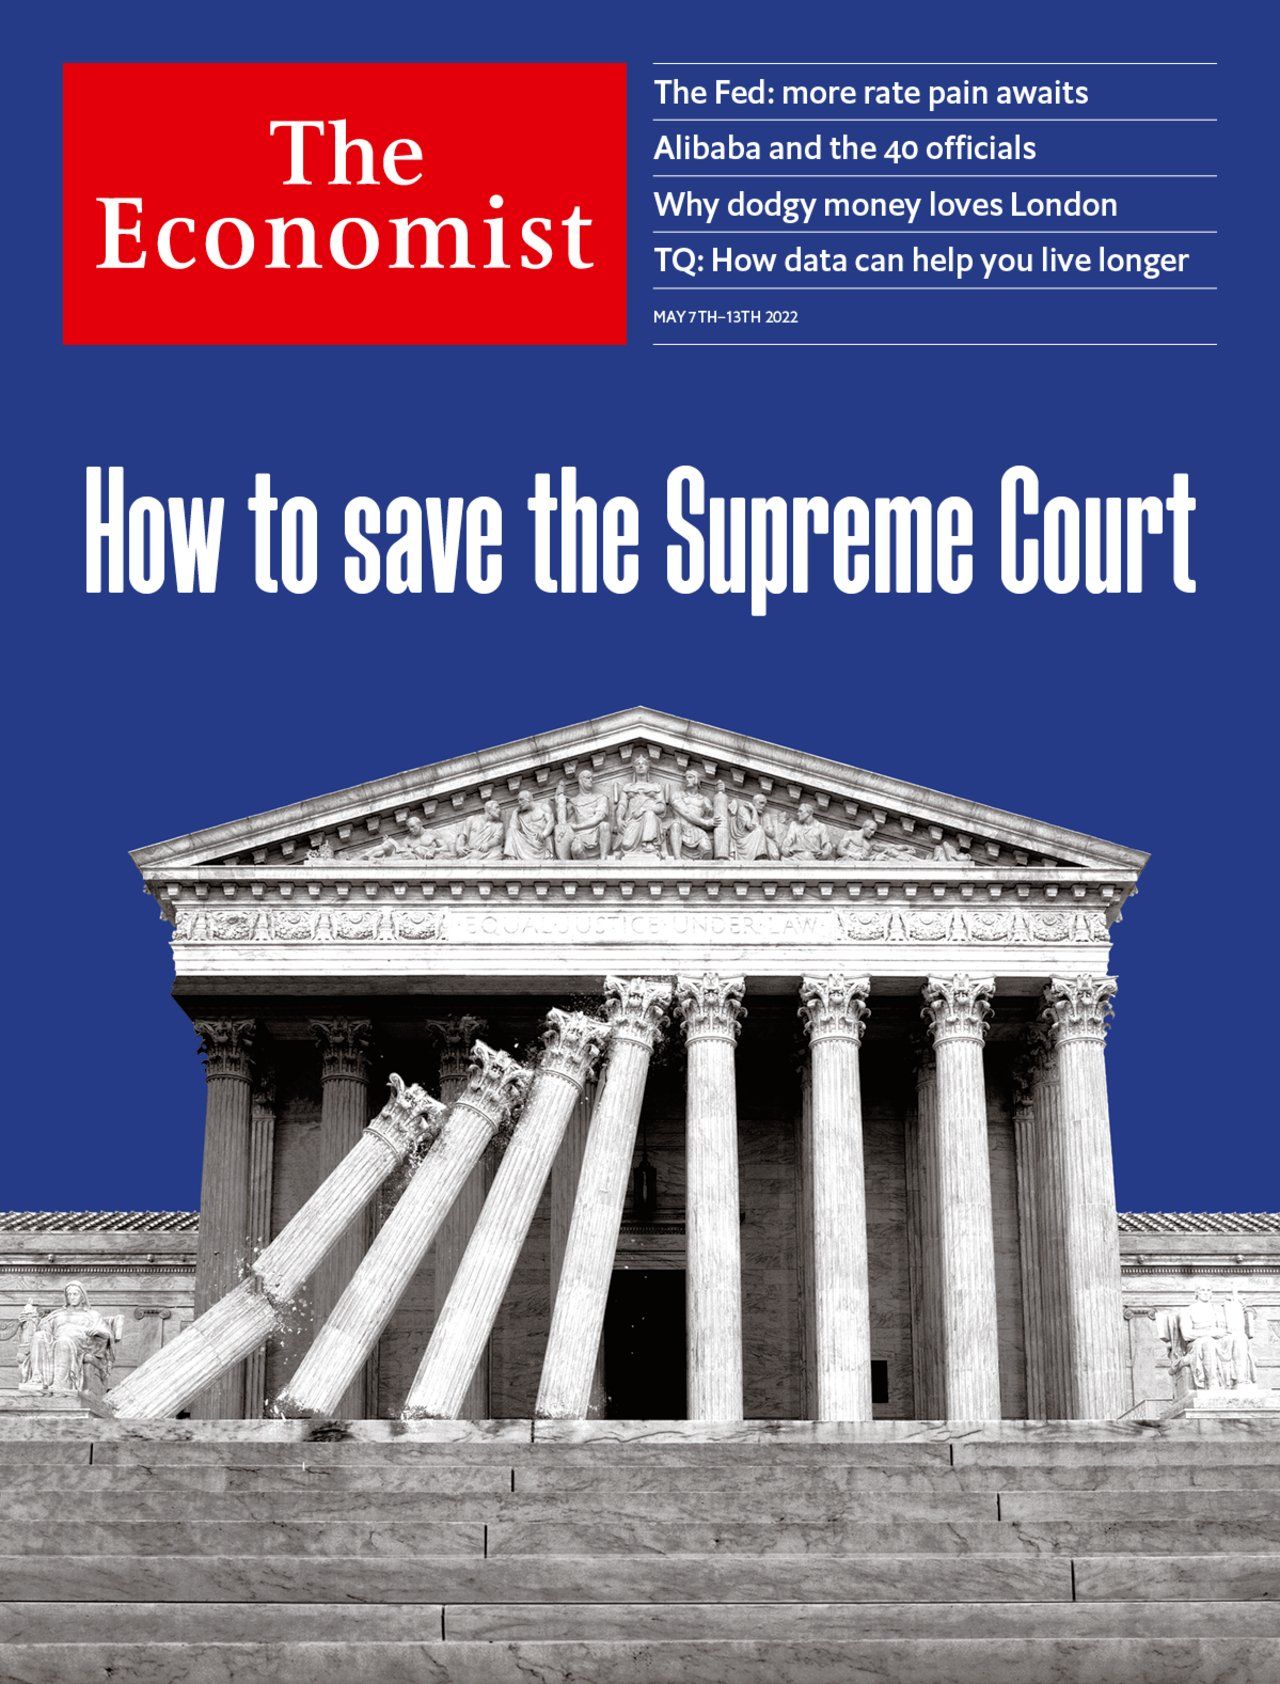 How to save the Supreme Court